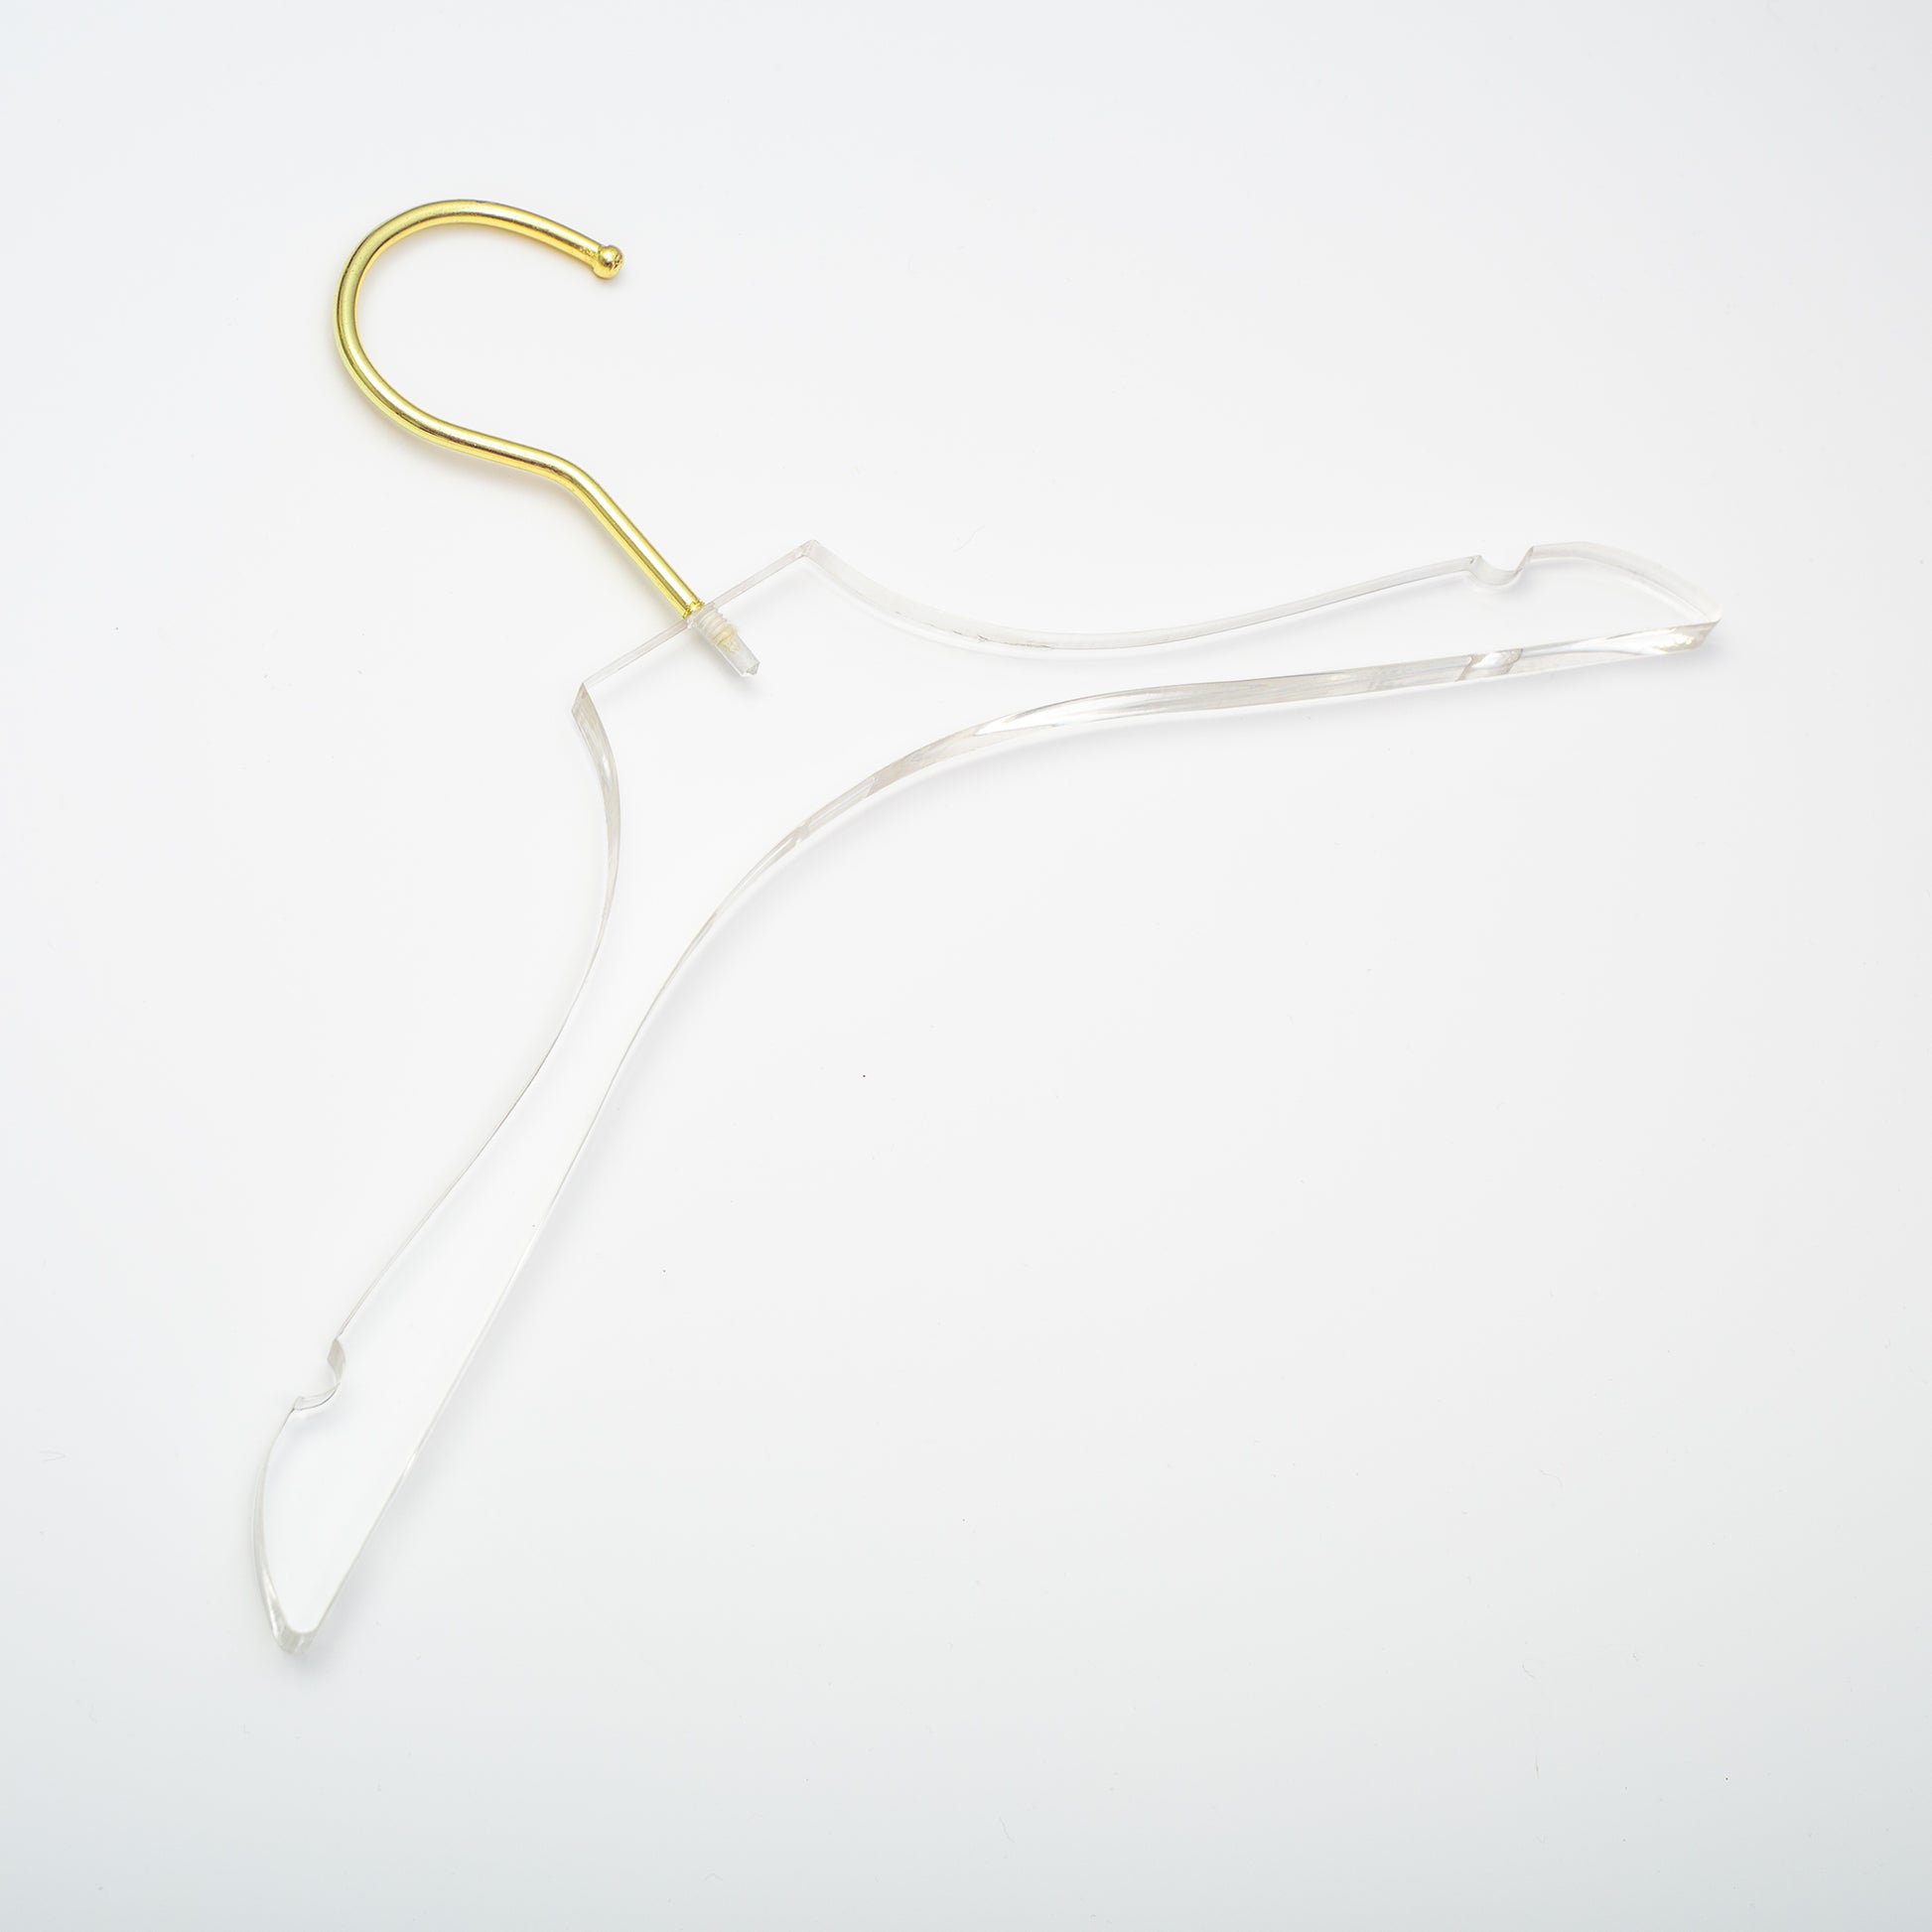 Homecube USA Elegant Acrylic Clear Clothes Hangers with Gold Hook